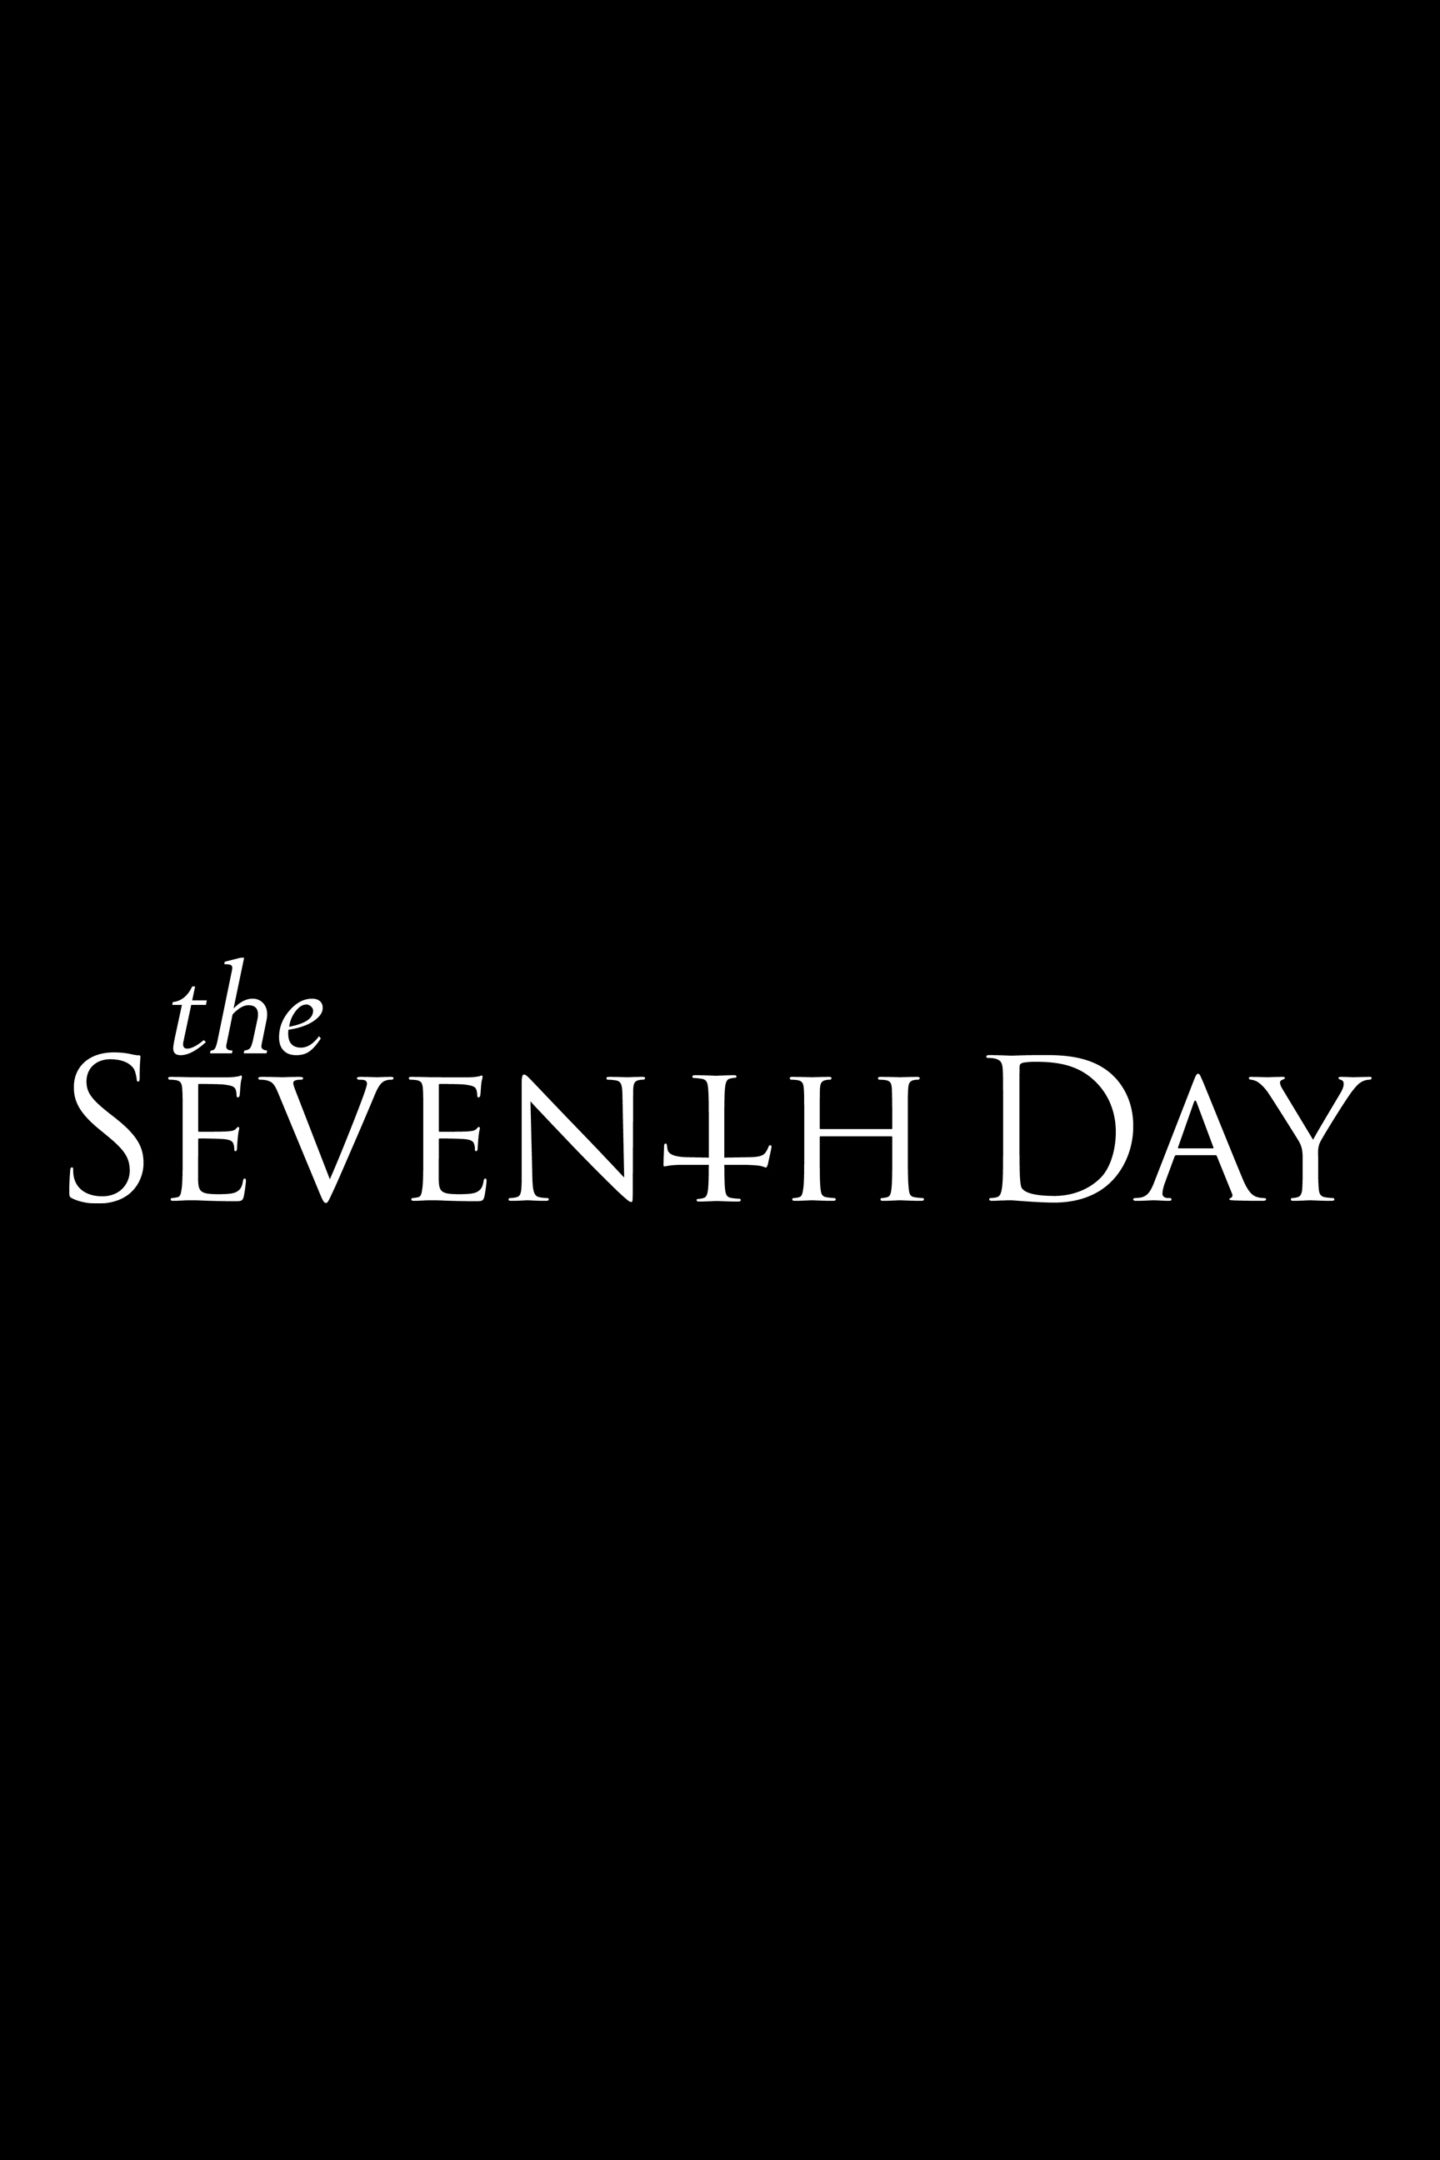 The Seventh Day – Teaser Poster